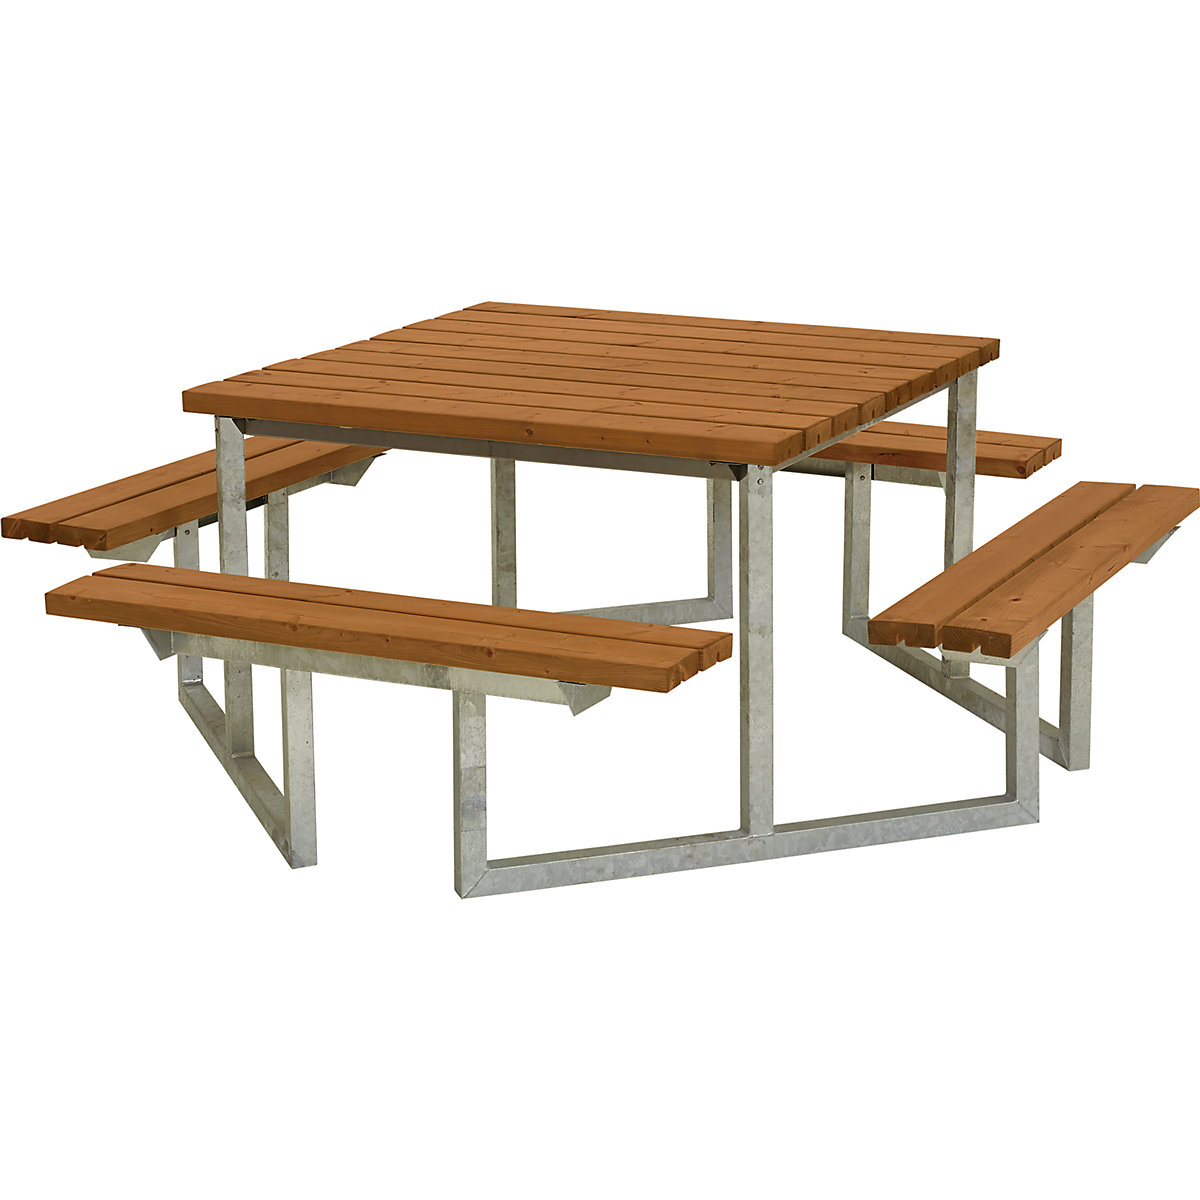 Picnic bench for 8 people, certified pine wood, teak stain-5